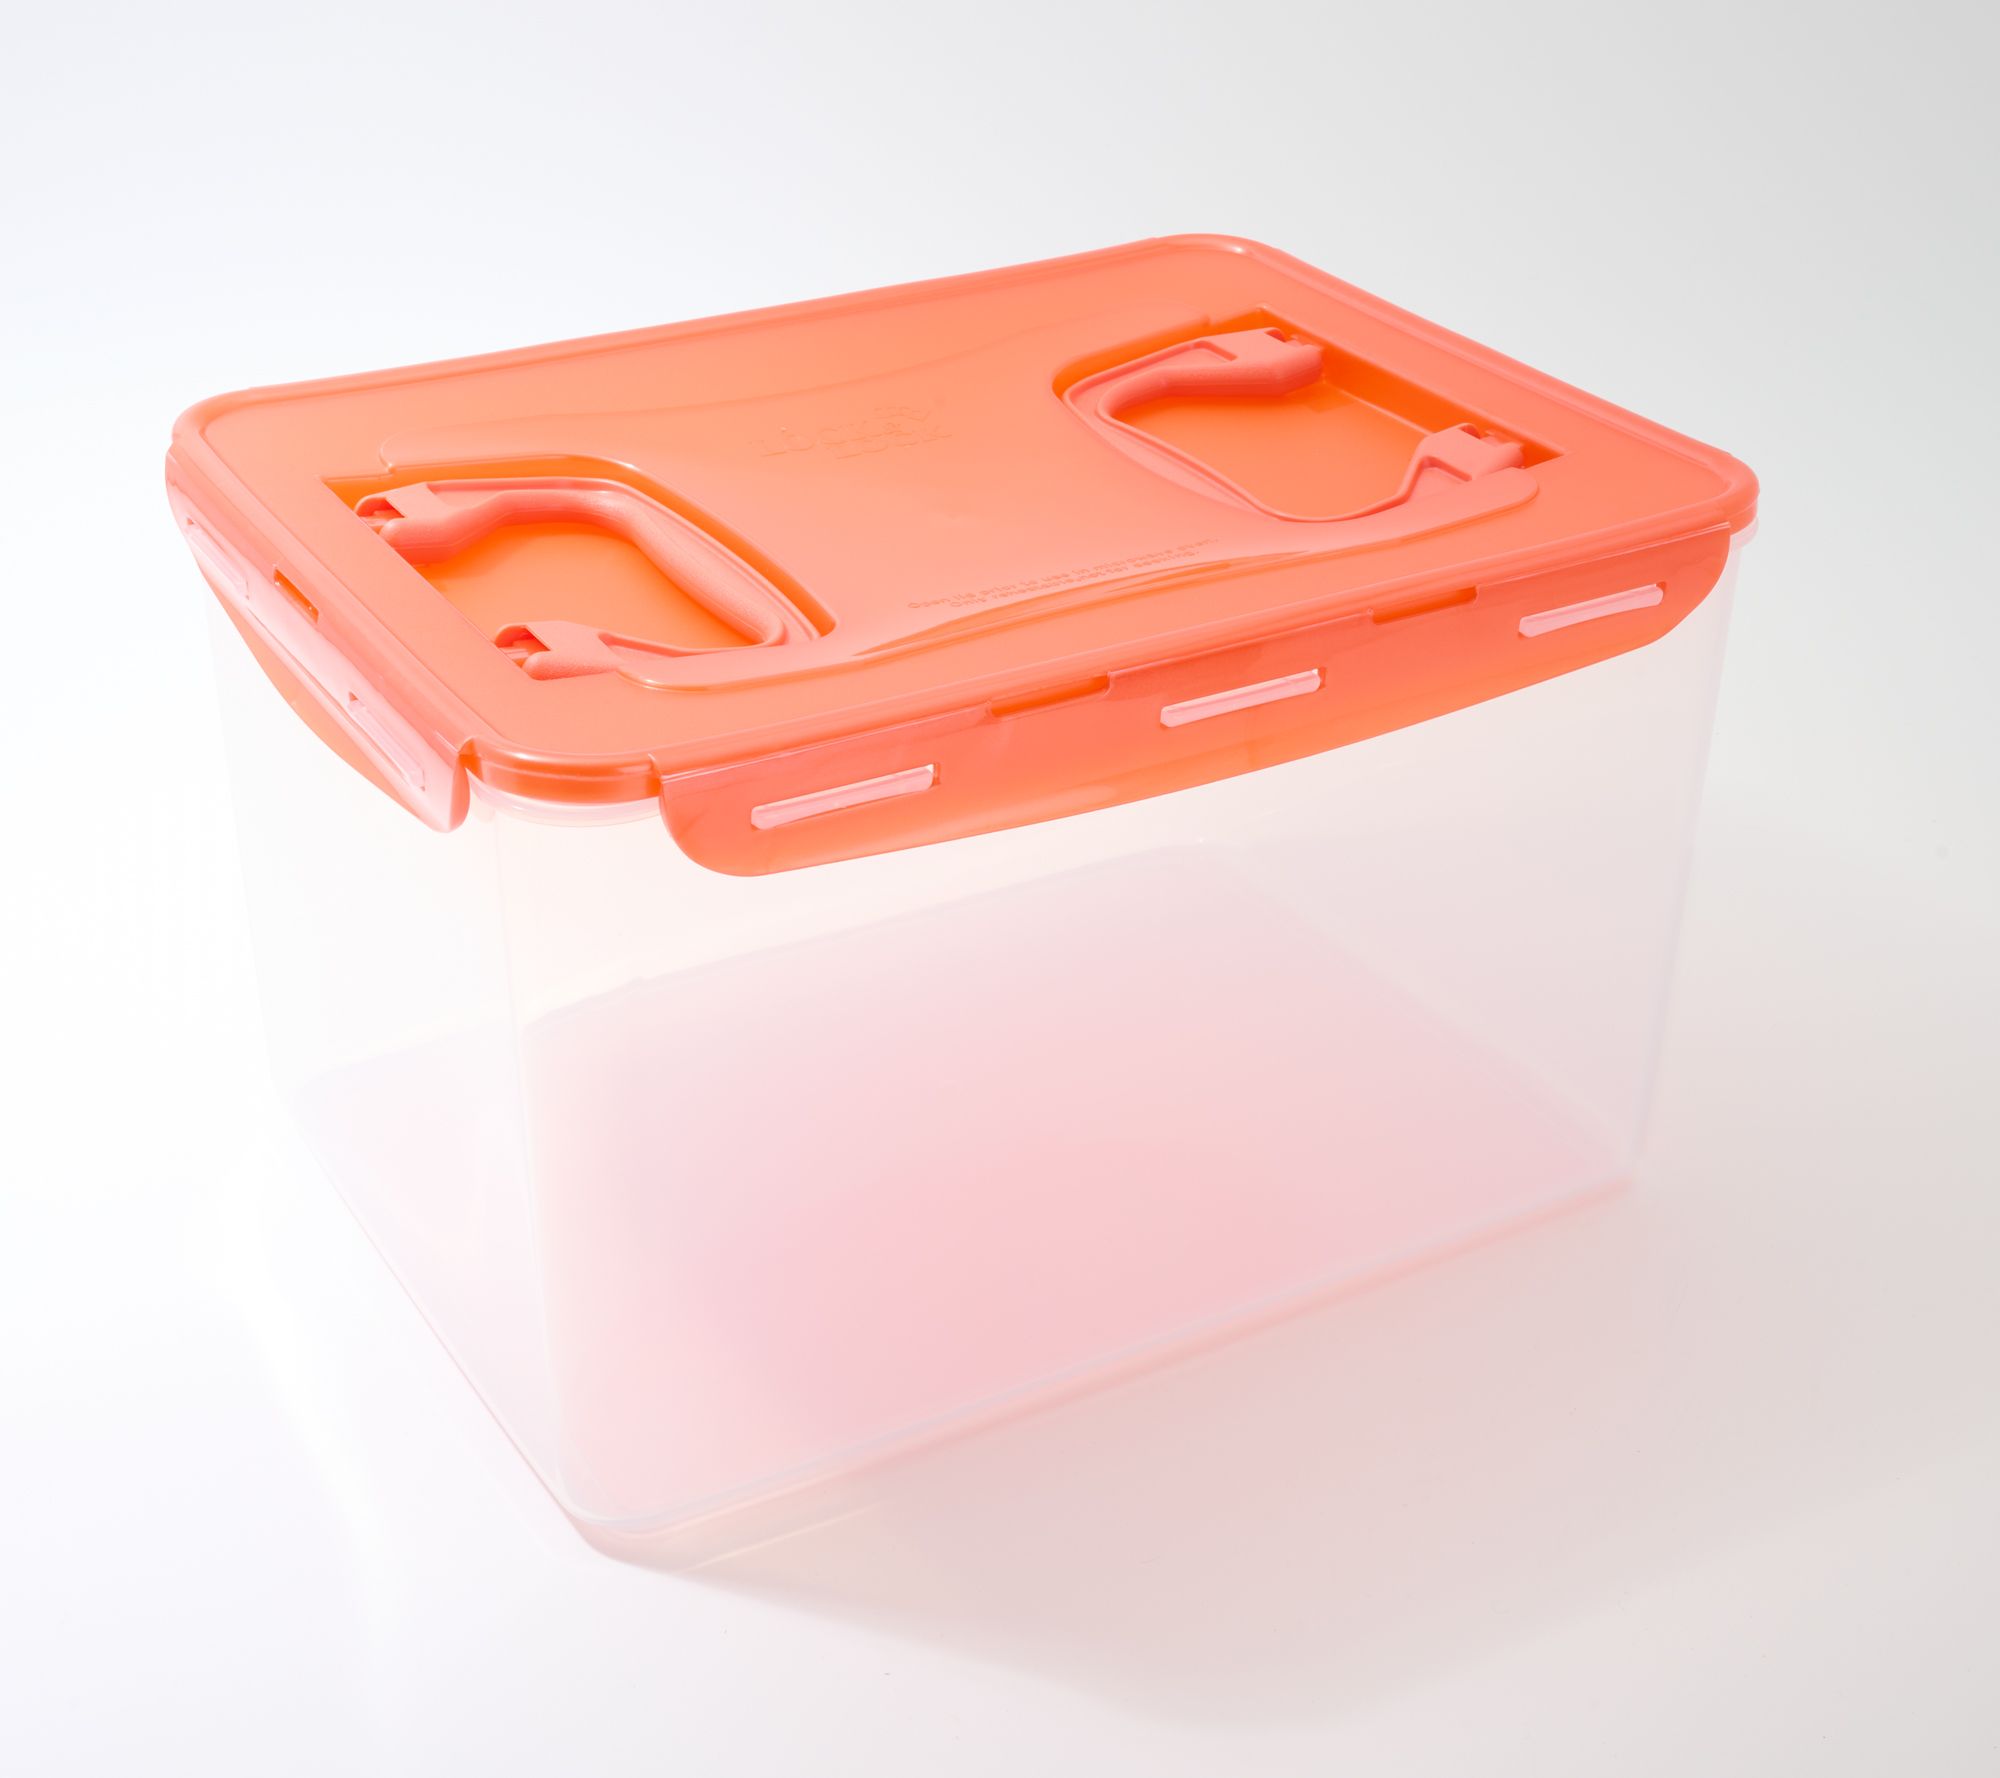 How to Use This Multi-Storage Containers? Tips for Diamond